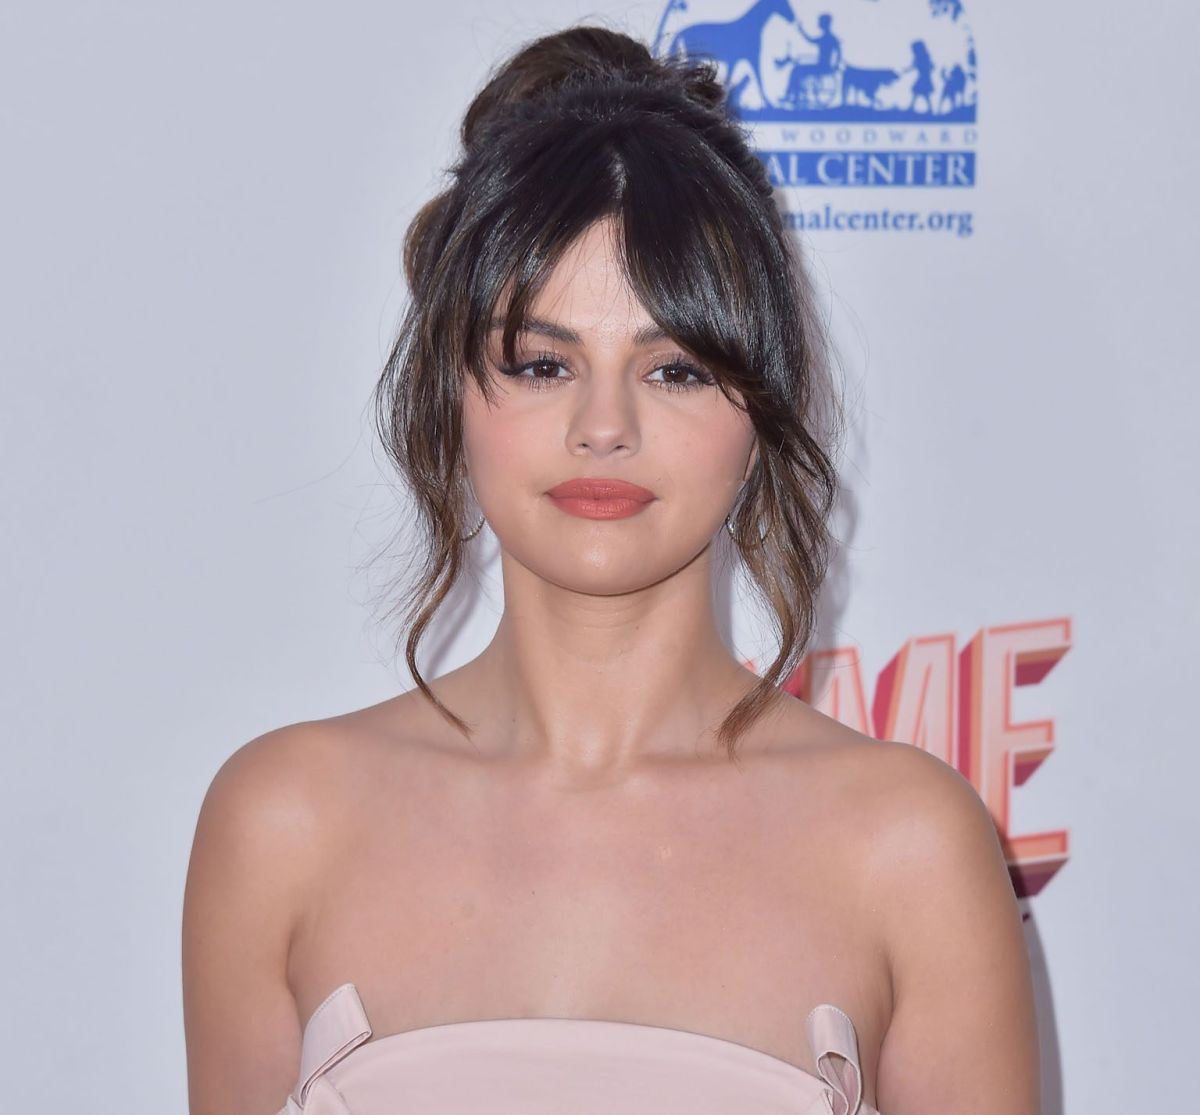 Selena Gomez explains why she may not be able to have children of her own